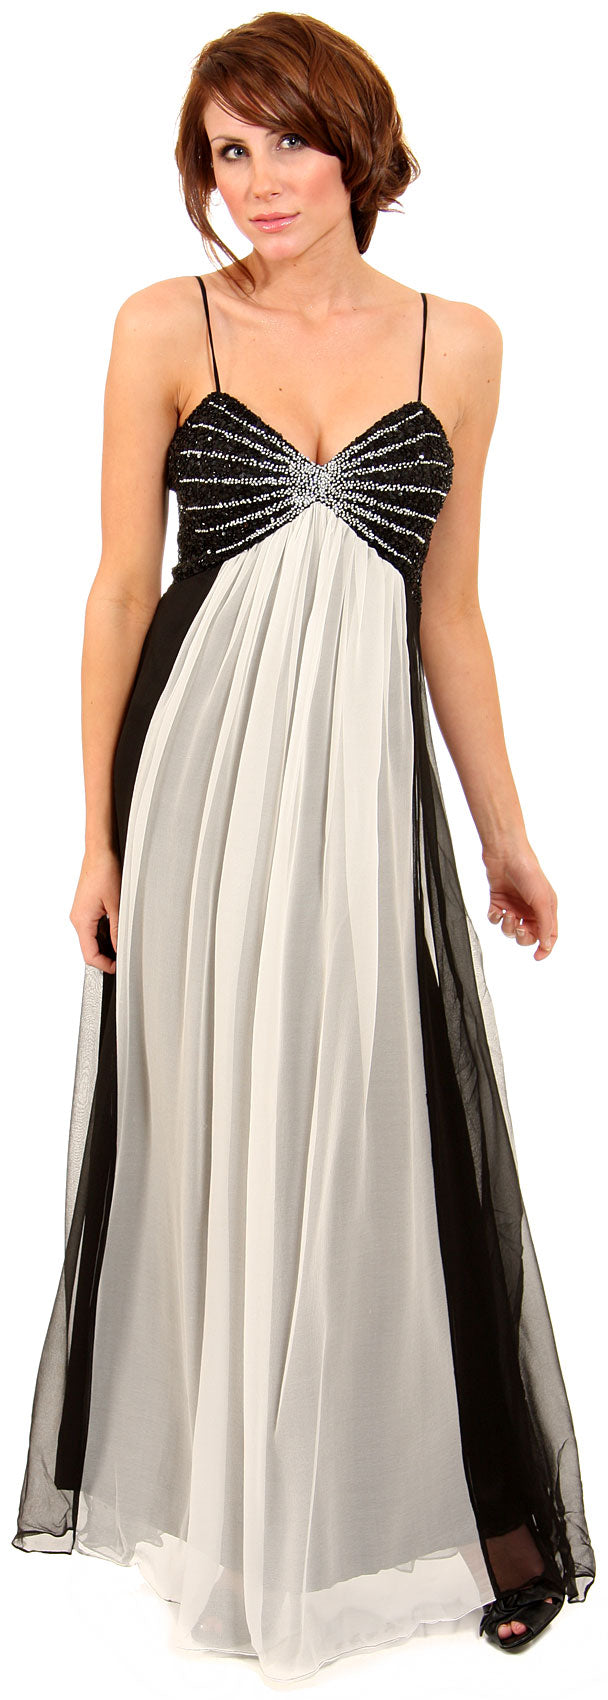 Main image of Two Tone Butterfly Top Formal Party Dress